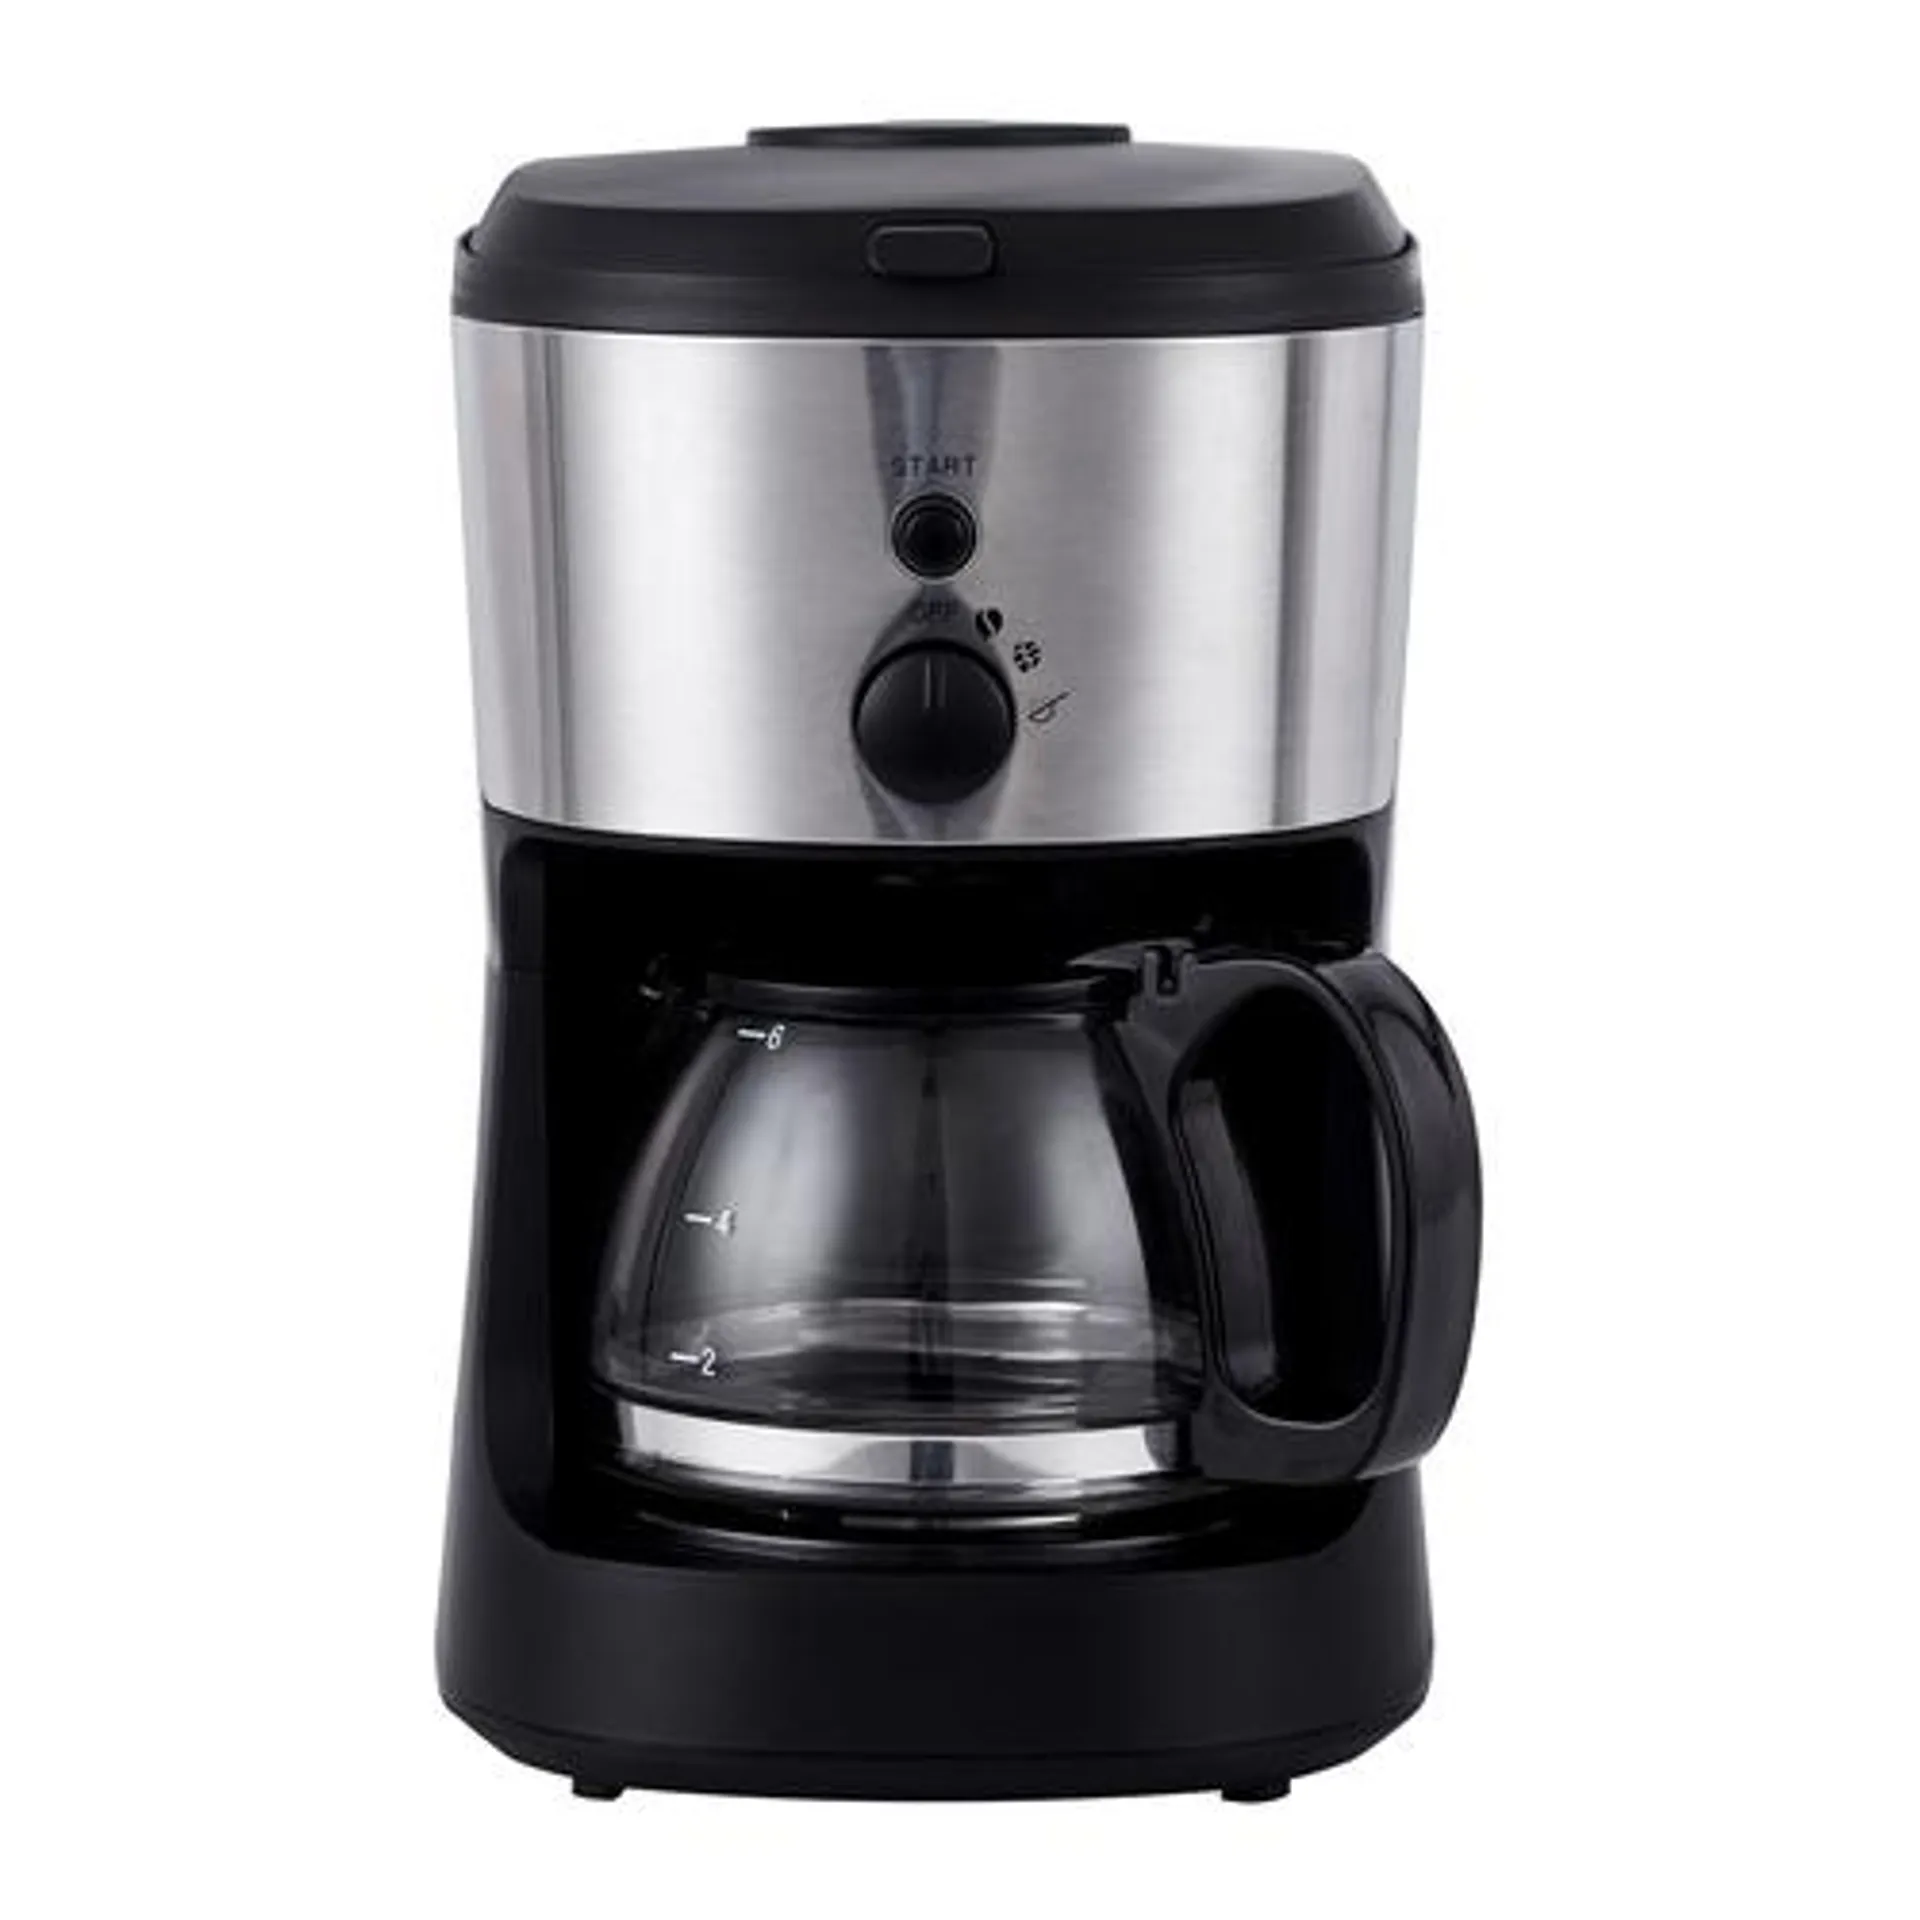 2-In-1 Grind and Brew 6-Cup Coffee Maker